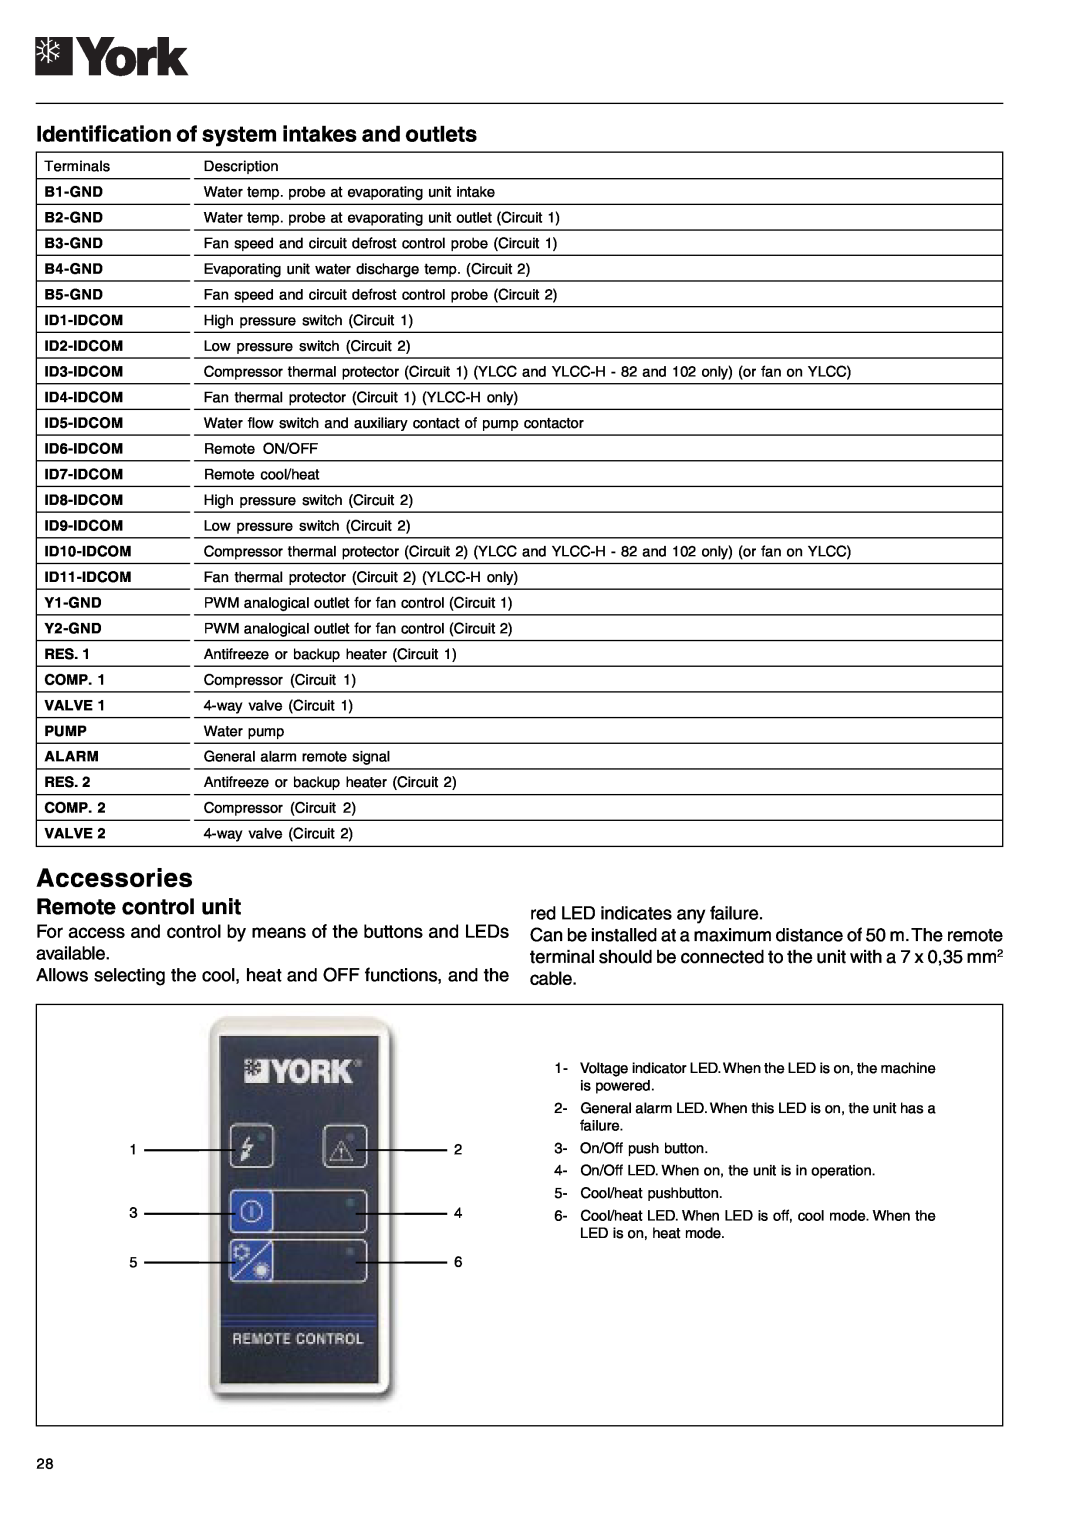 York YLCC 42/62/82/102/112, YLCC-h, 122, 152 Accessories, Identification of system intakes and outlets, Remote control unit 